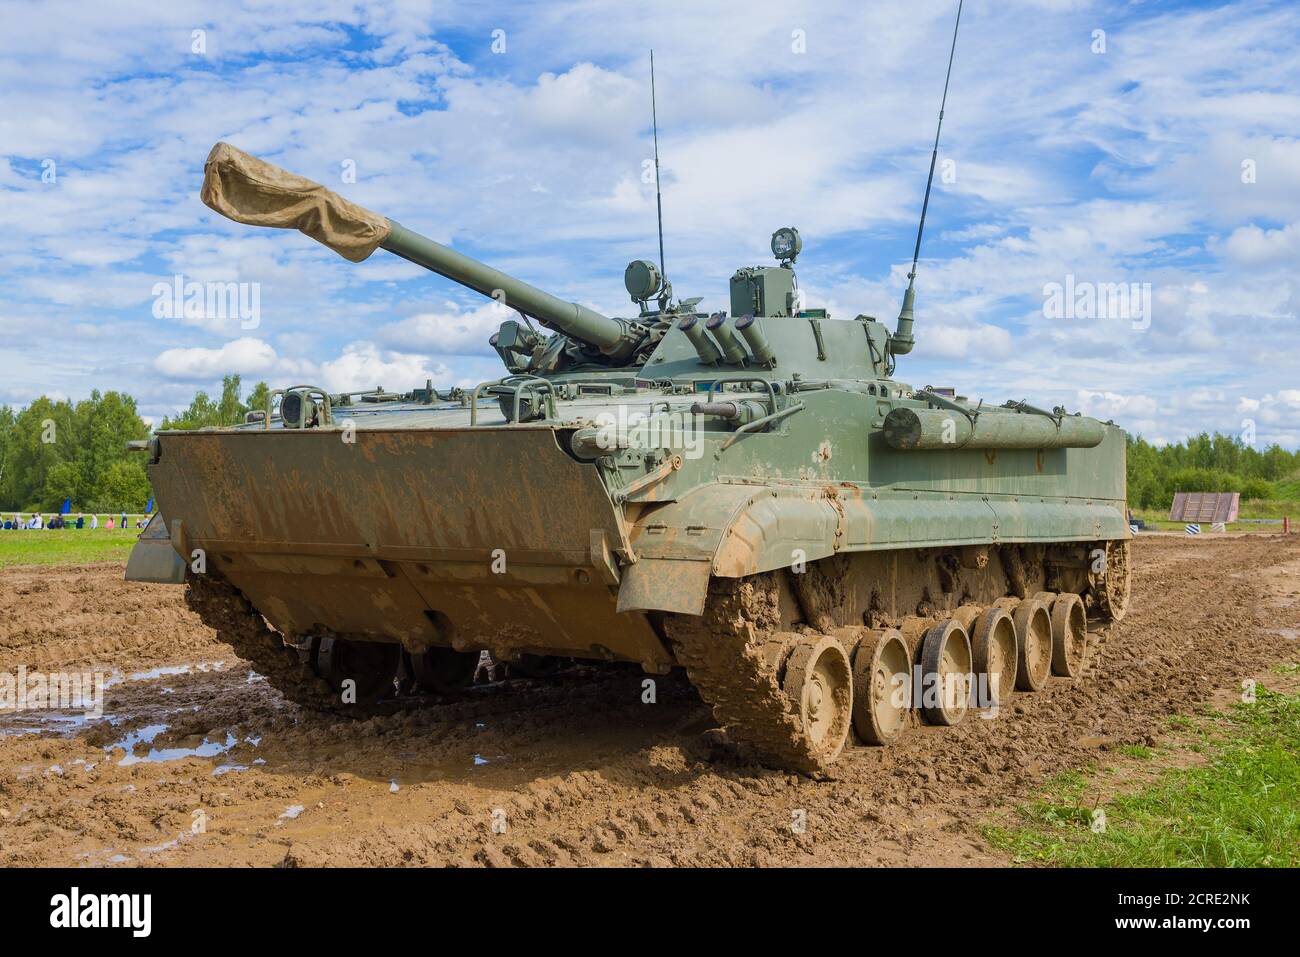 MOSCOW REGION, RUSSIA - AUGUST 27, 2020: BMP-3 infantry fighting vehicle close-up on the Alabino training ground. Stock Photo